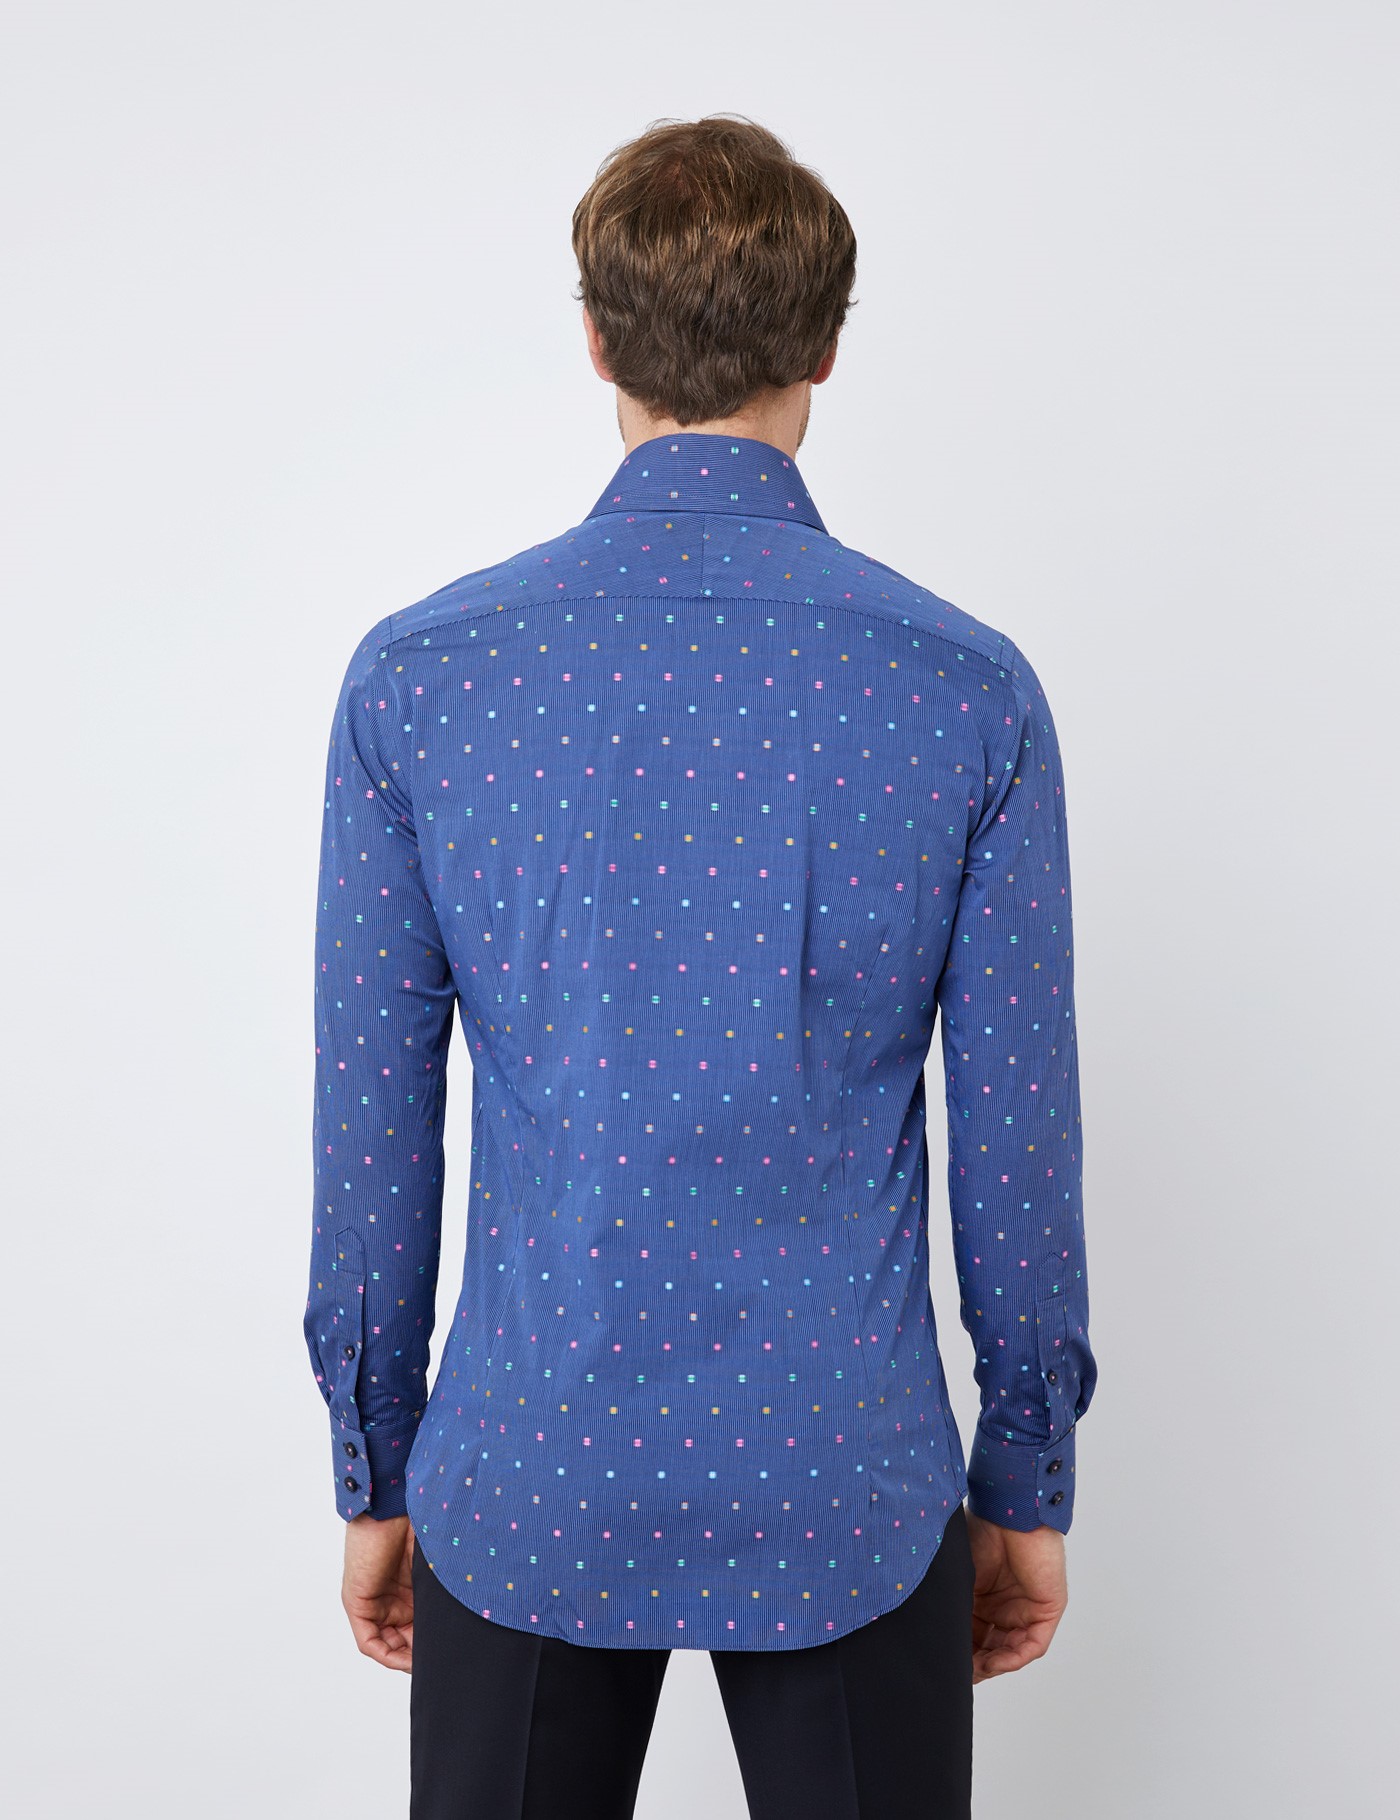 100% Cotton Men's Dobby Relaxed Slim Shirt with Spots in Navy & Pink ...